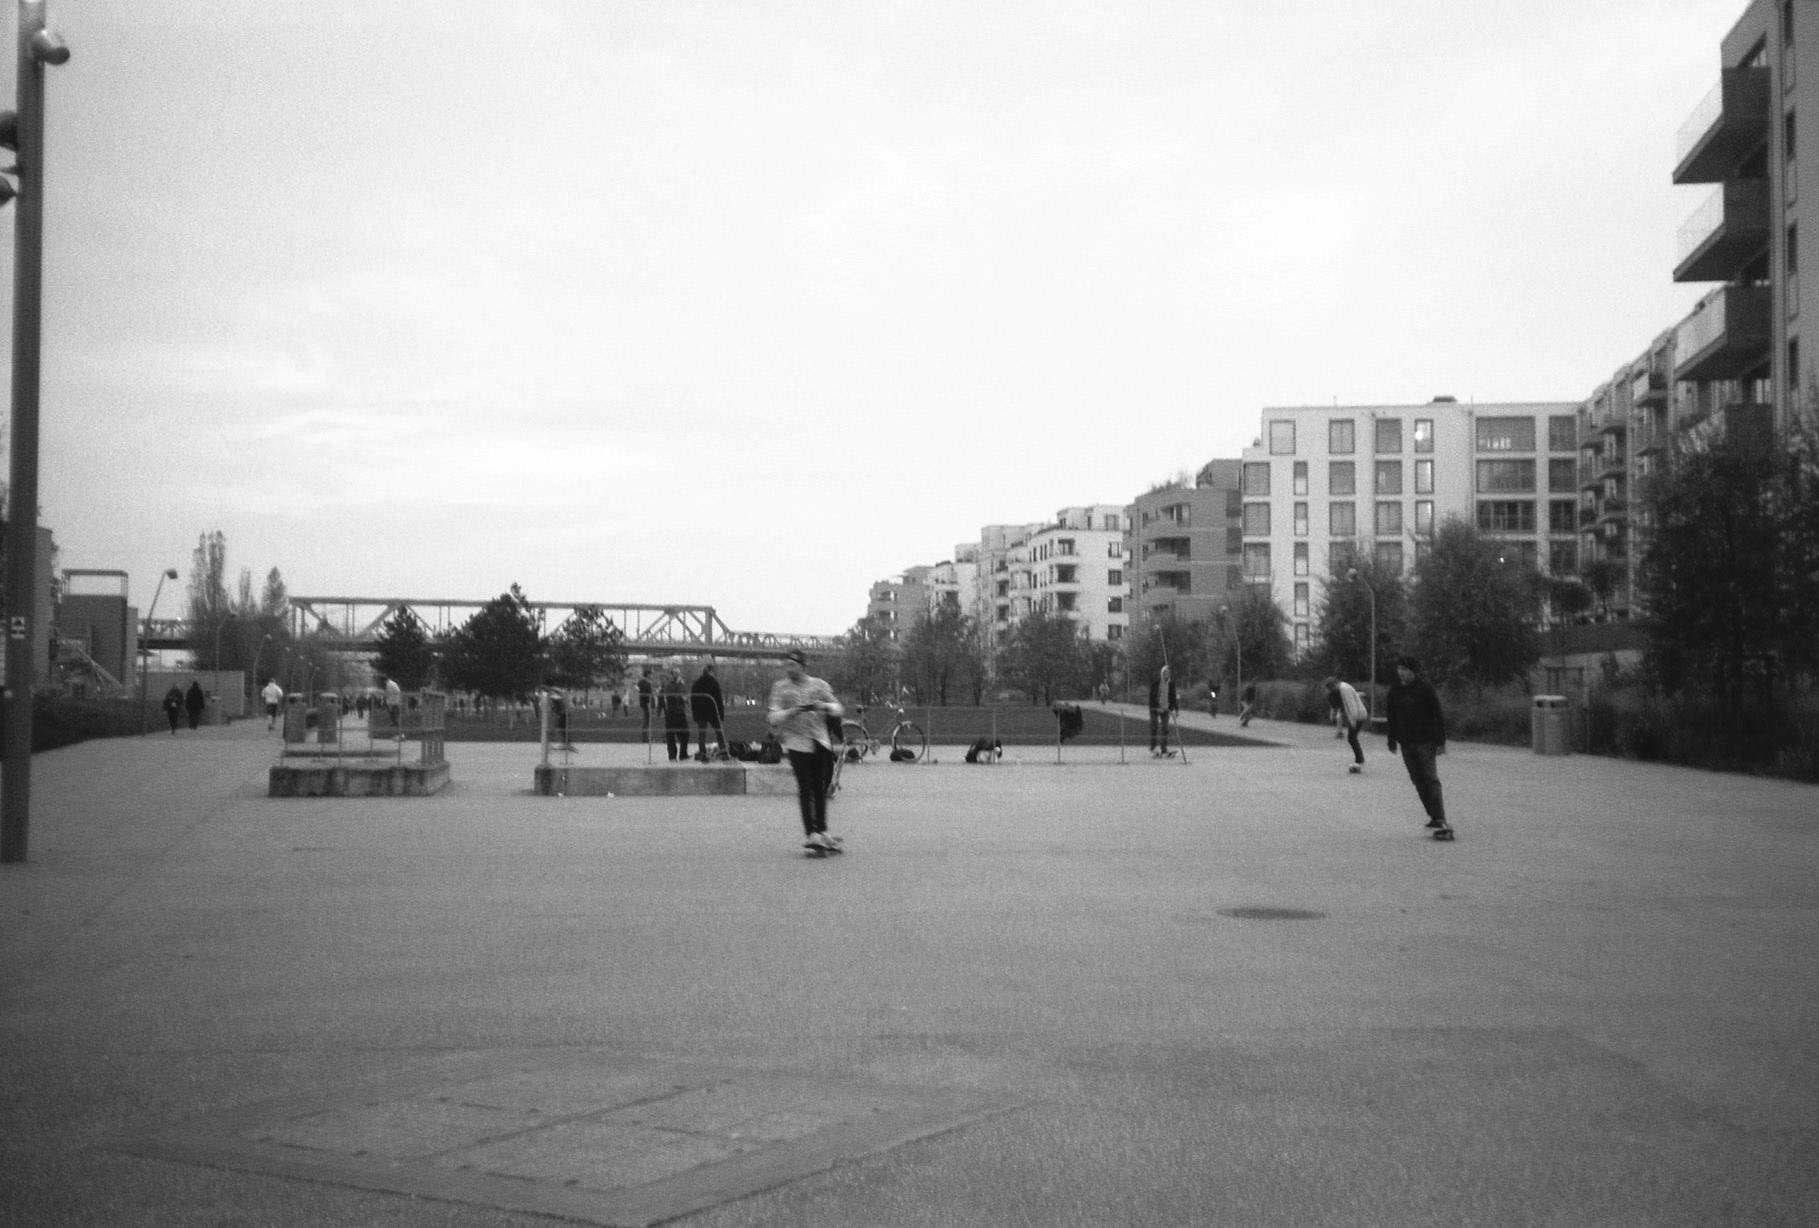 a large flat park area where several people are skateboarding, walking and hanging around, area is surrounded by buildings on the right side